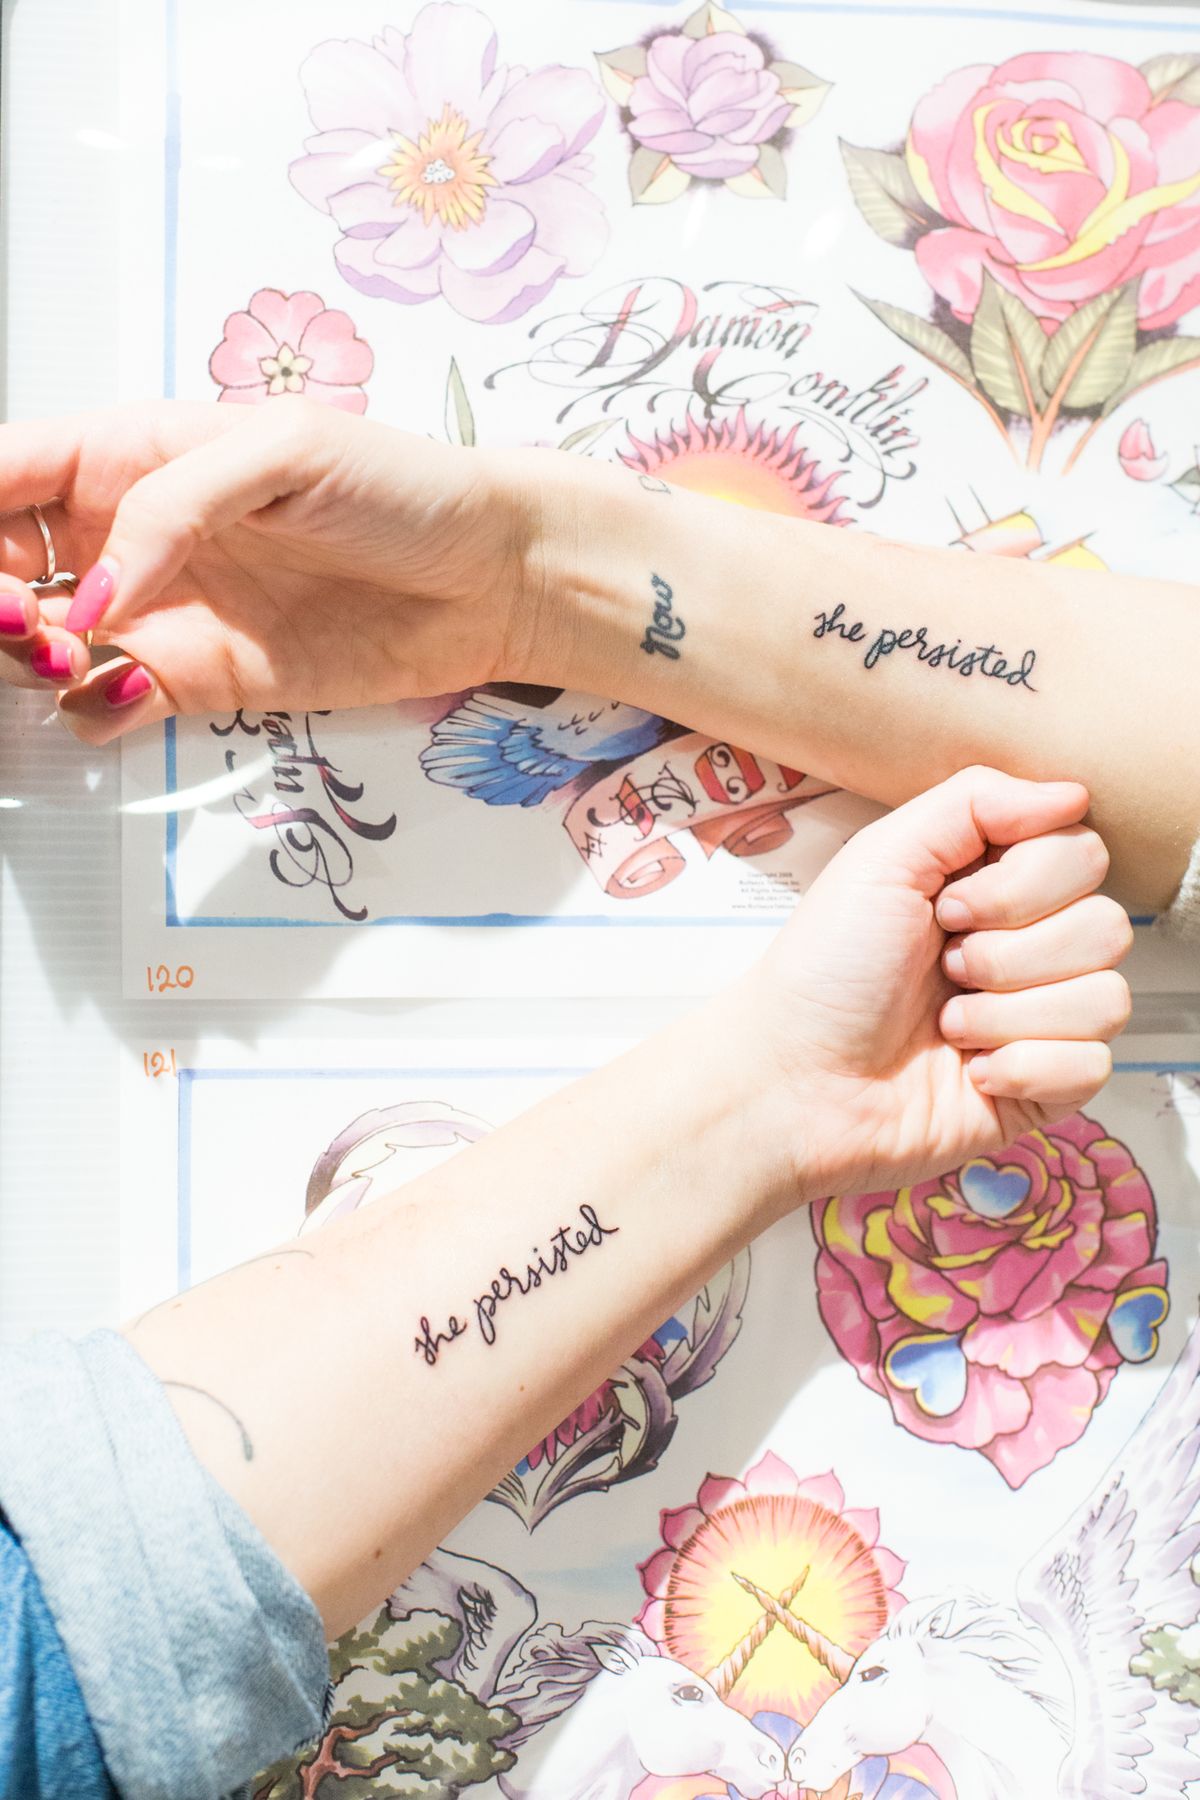 How I Accidentally Convinced 100 Strangers to Get Matching Tattoos